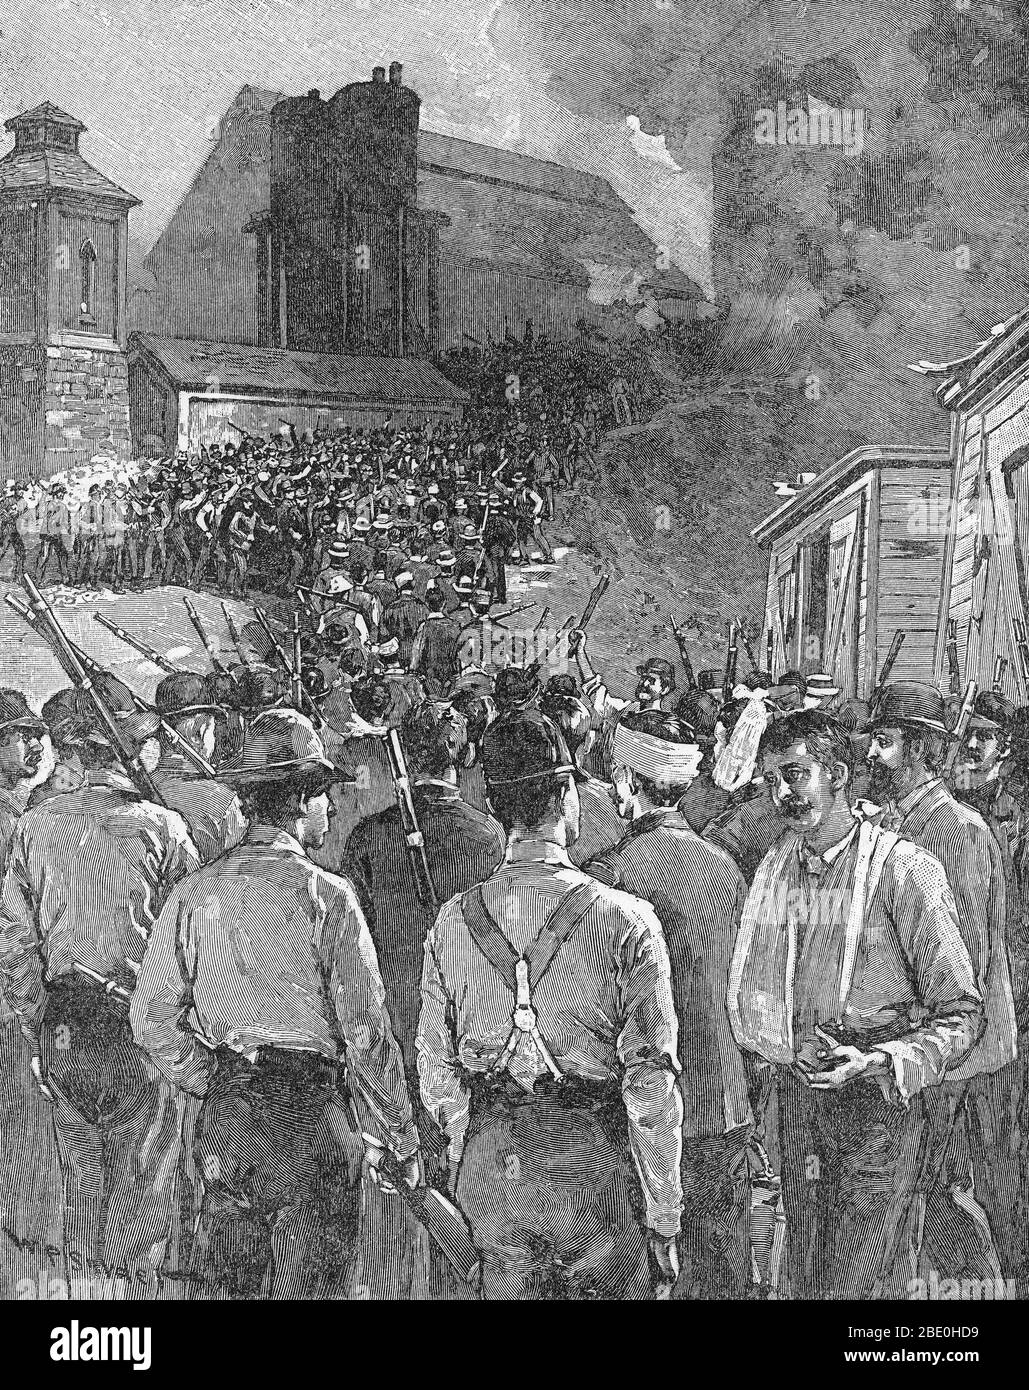 The Homestead Strike was an industrial lockout and strike which began on June 30, 1892, culminating in a battle between strikers and private security agents on July 6, 1892. The battle was the second largest and one of the most serious disputes in US labor history second only to the Battle of Blair Mountain. The dispute occurred at the Homestead Steel Works in the Pittsburgh area town of Homestead, Pennsylvania, between the Amalgamated Association of Iron and Steel Workers (the AA) and the Carnegie Steel Company. The final result was a major defeat for the union and a setback for efforts to un Stock Photo